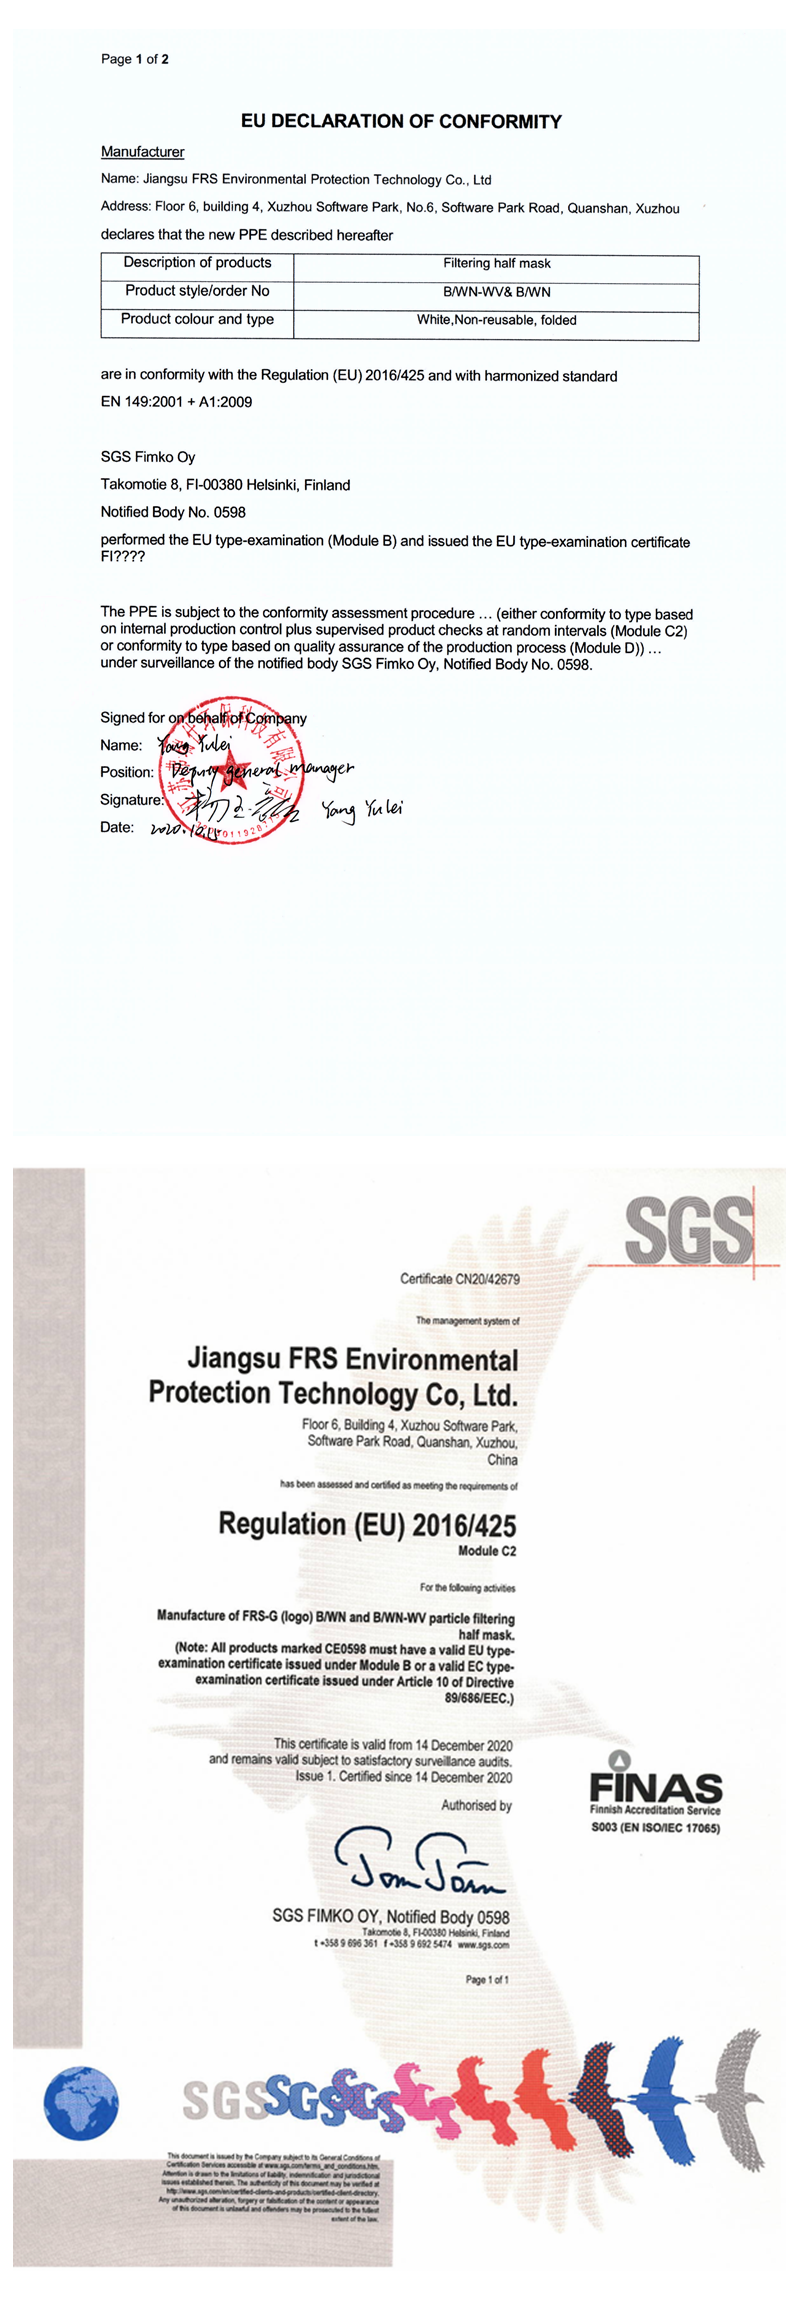 CE certificate by SGS_1_副本.png